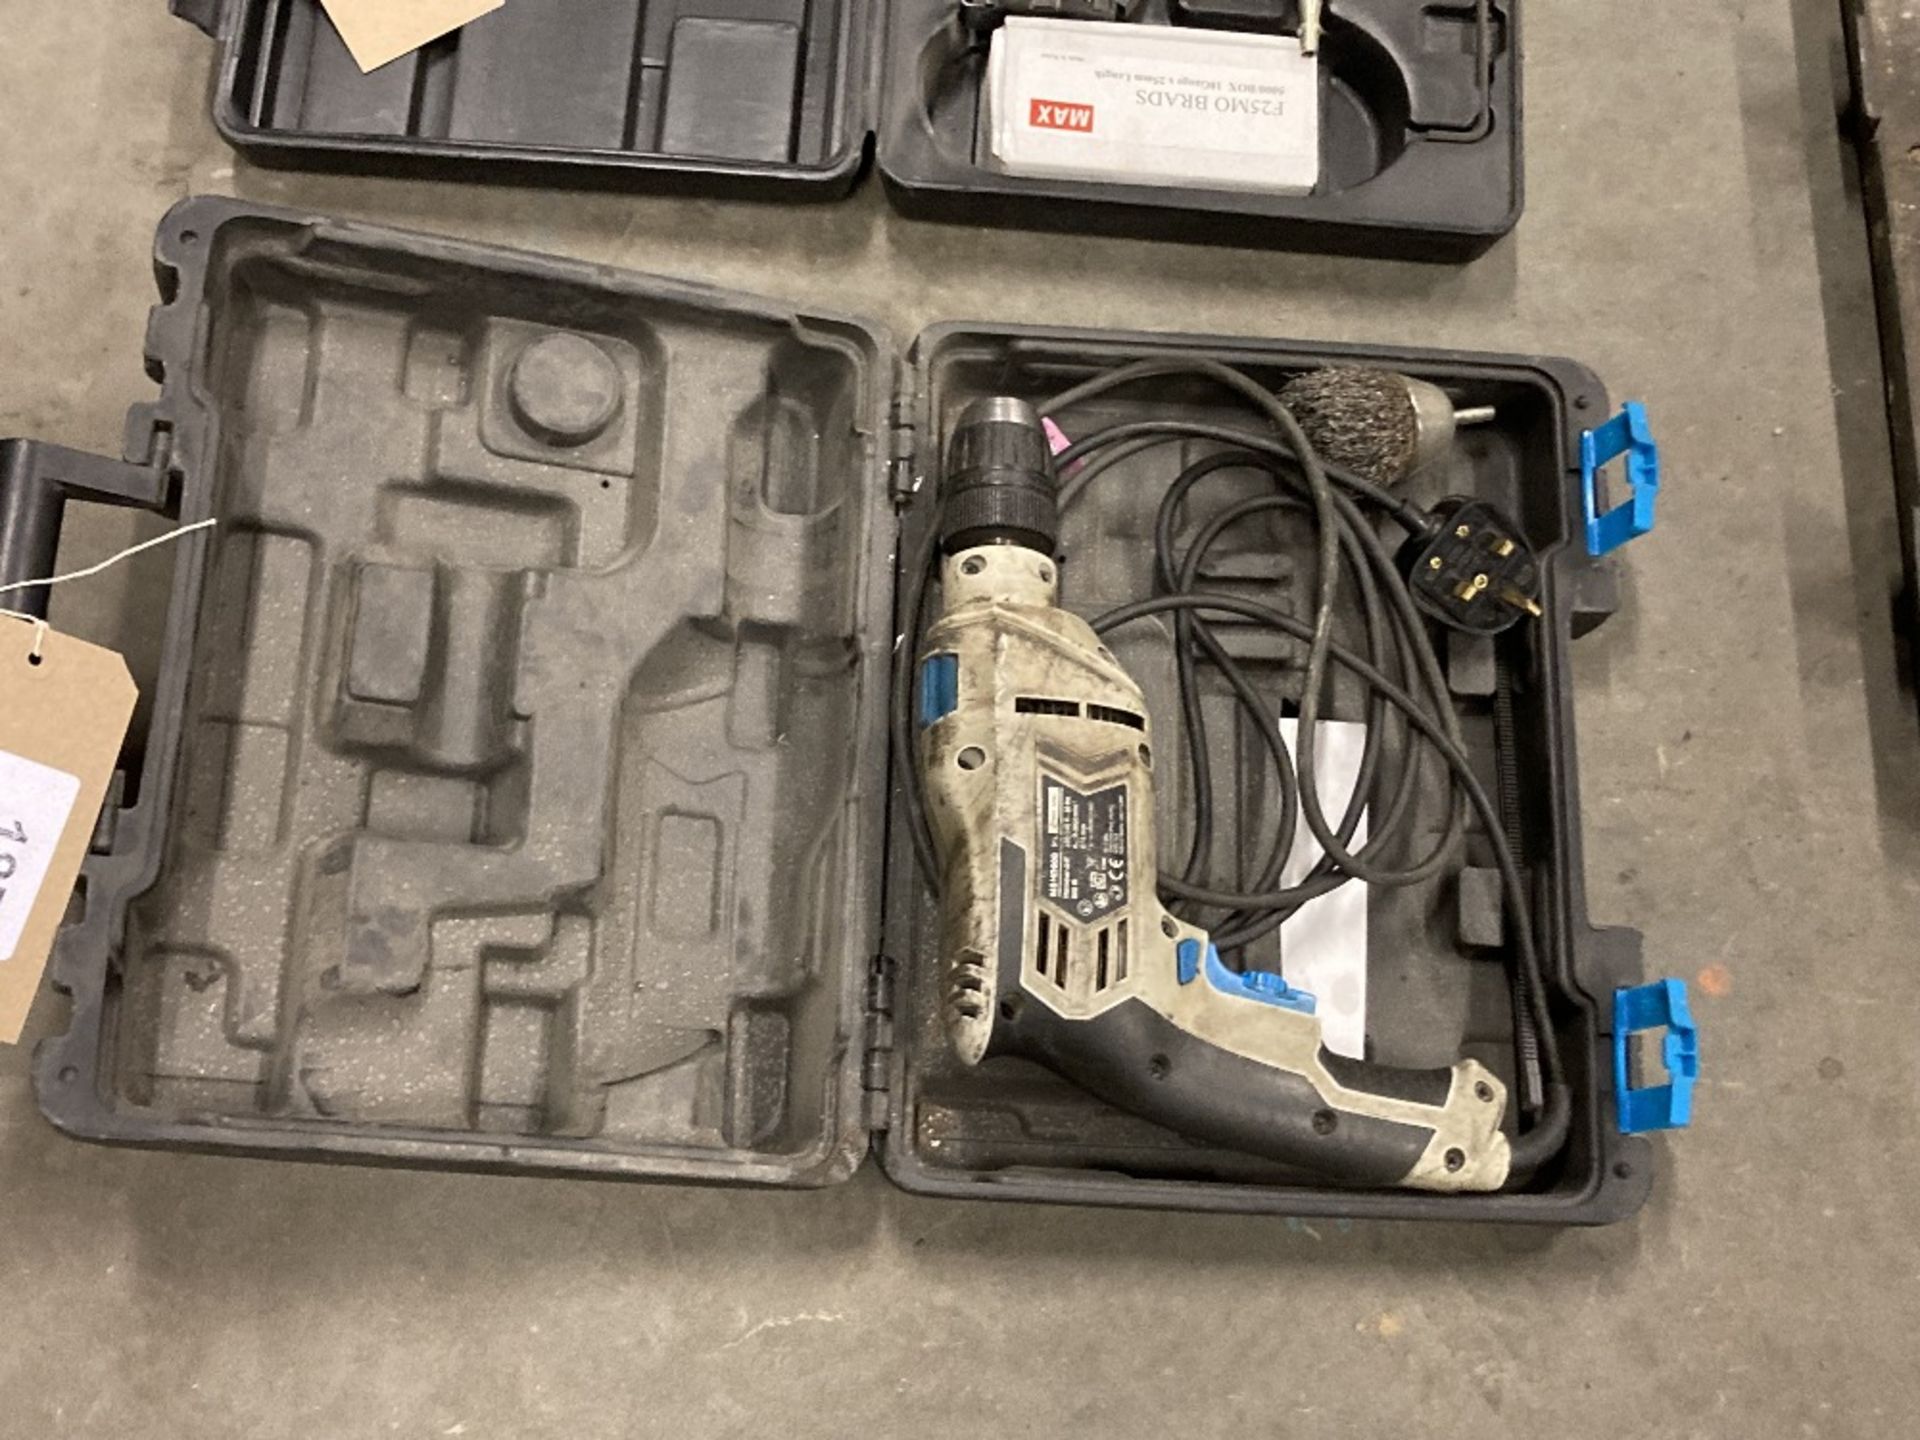 MacAlister MSHD600 230v hammer drill with plastic carry case - Image 3 of 3